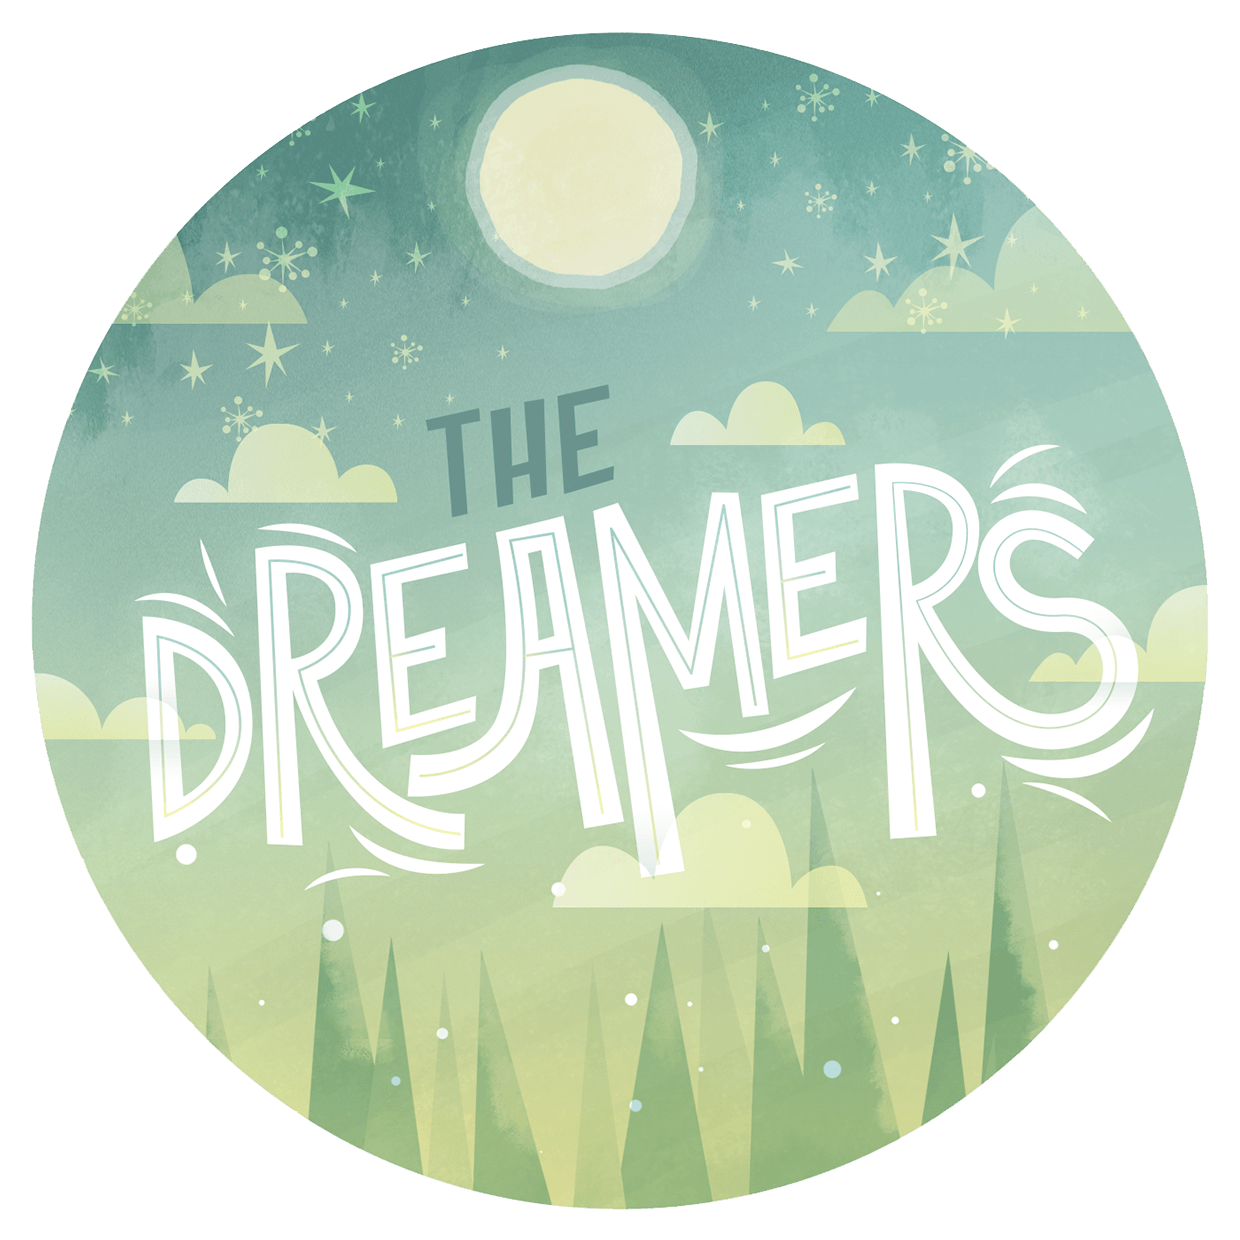 Dreamers Logo - The Dreamers. Illustration Inspiration. Character